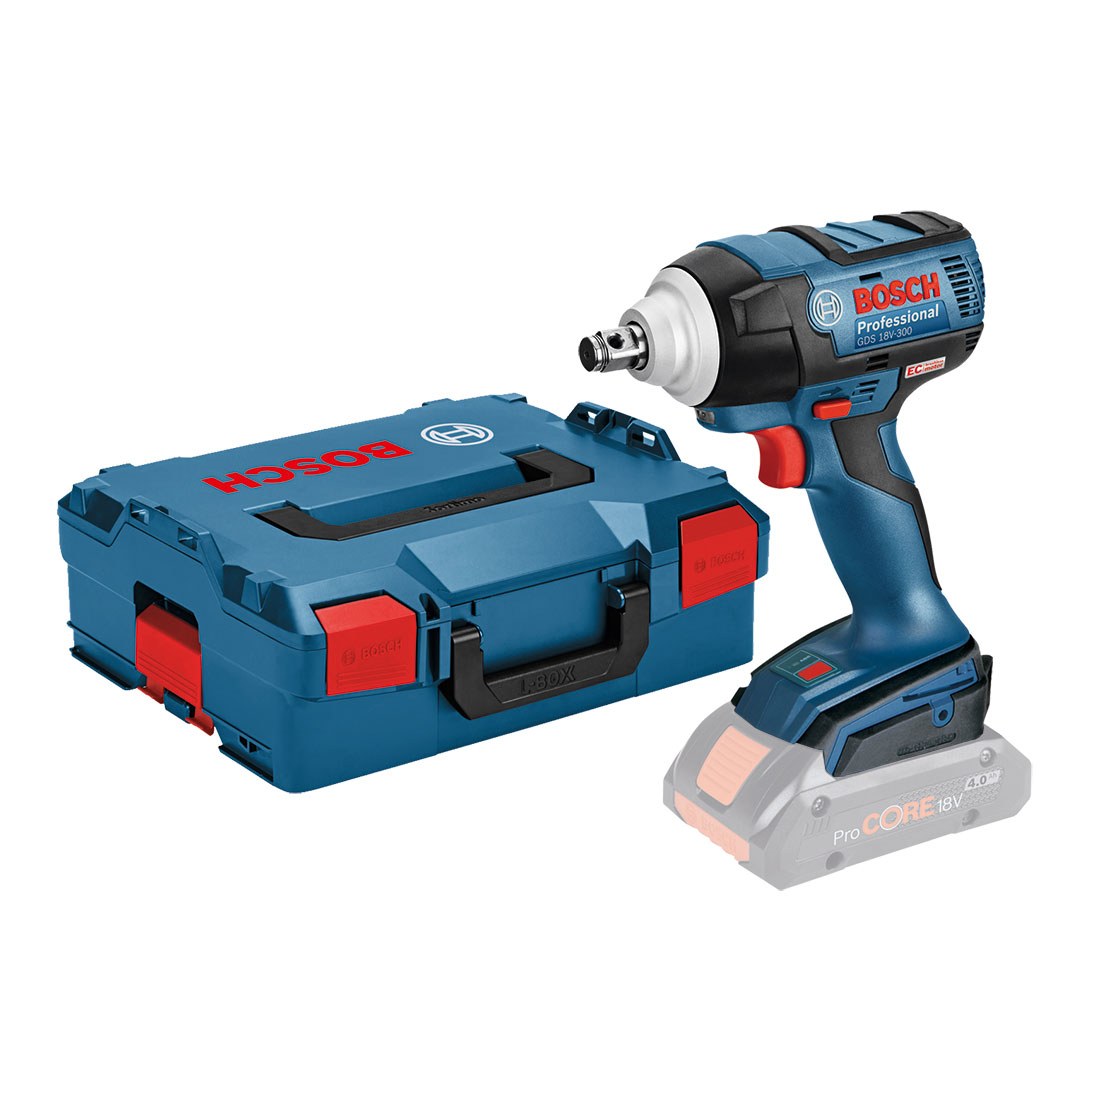 Battery not Included, in Cardboard Box 18 V Blue Bosch Professional 06019D8200 Carton 18V System Cordless Impact Wrench GDS 18V-300 